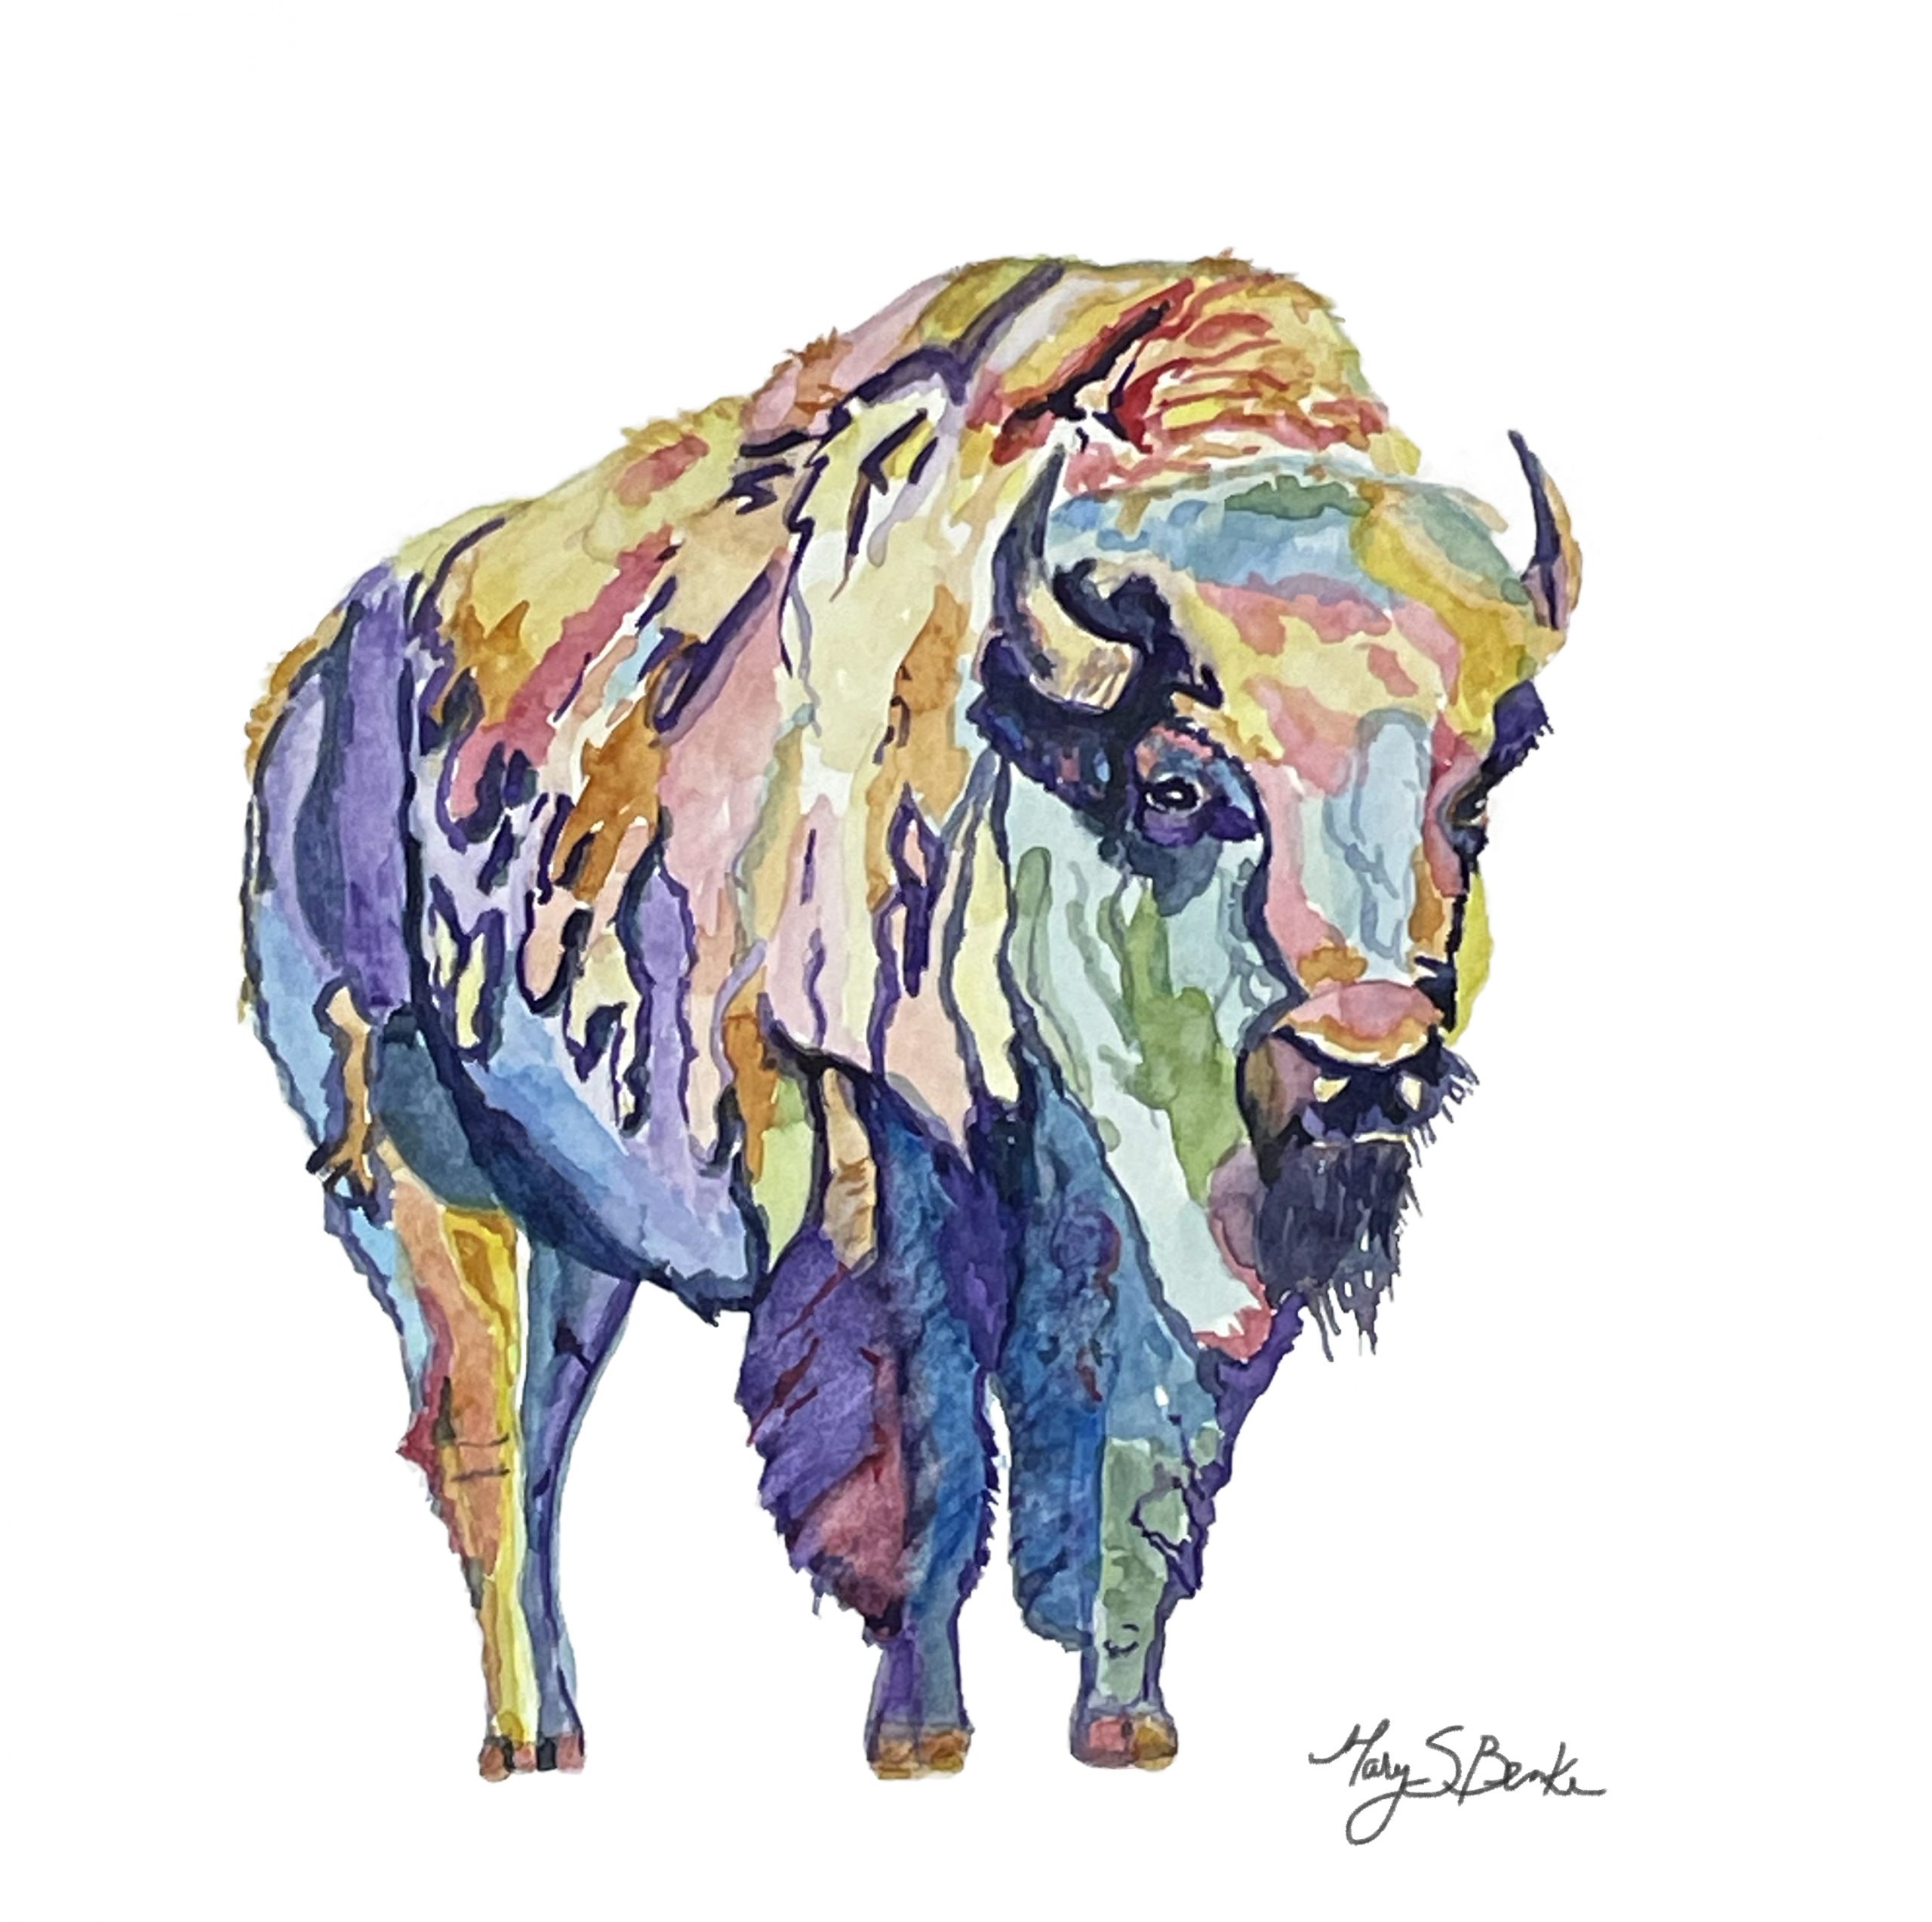 Painted in a fun, colorful style, this watercolor bison's rainbow-colored hide and face stand out against a stark white background by Mary Benke